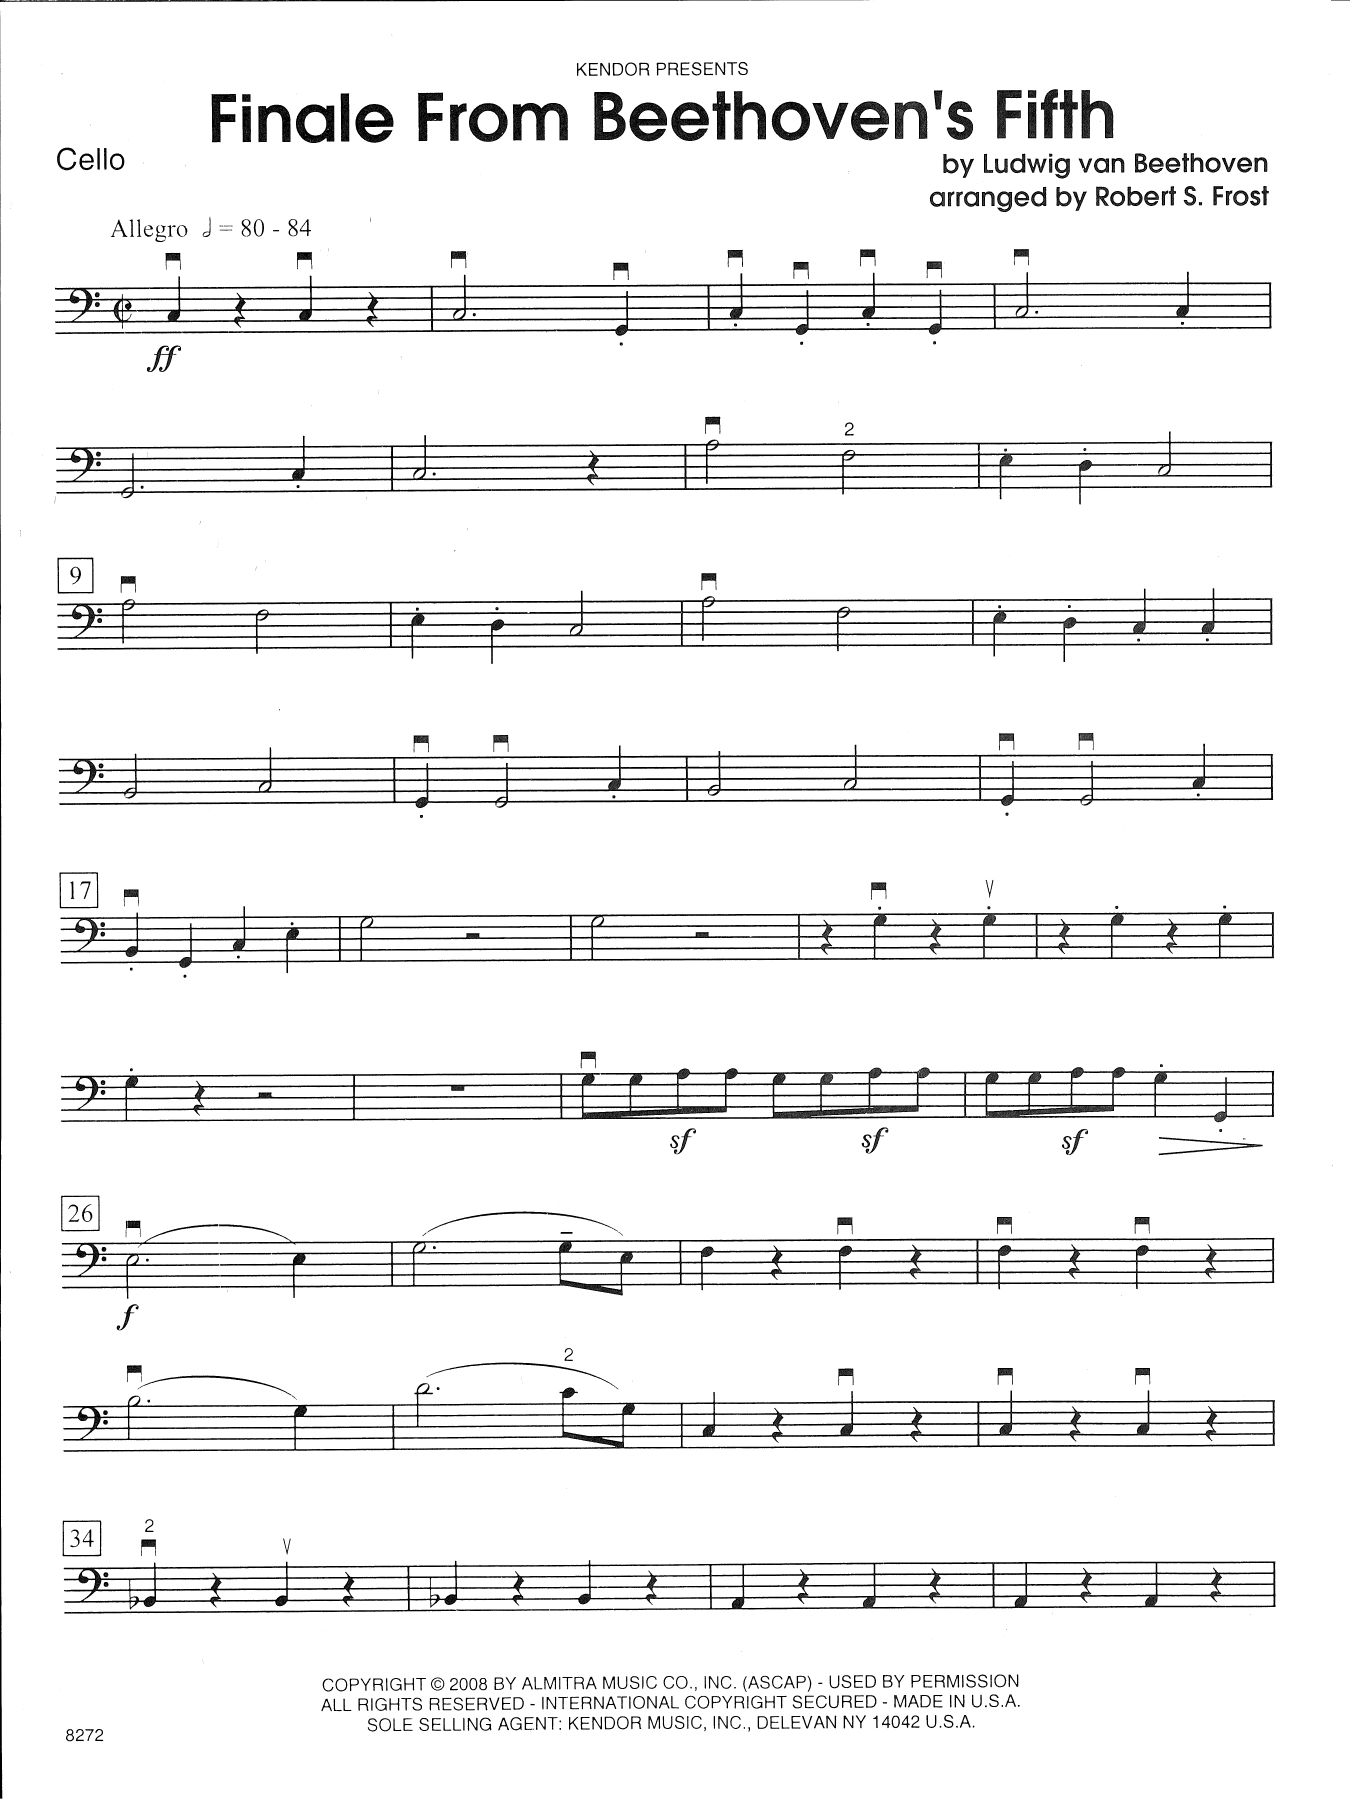 Download Ludwig van Beethoven Finale From Beethoven's Fifth - Cello Sheet Music